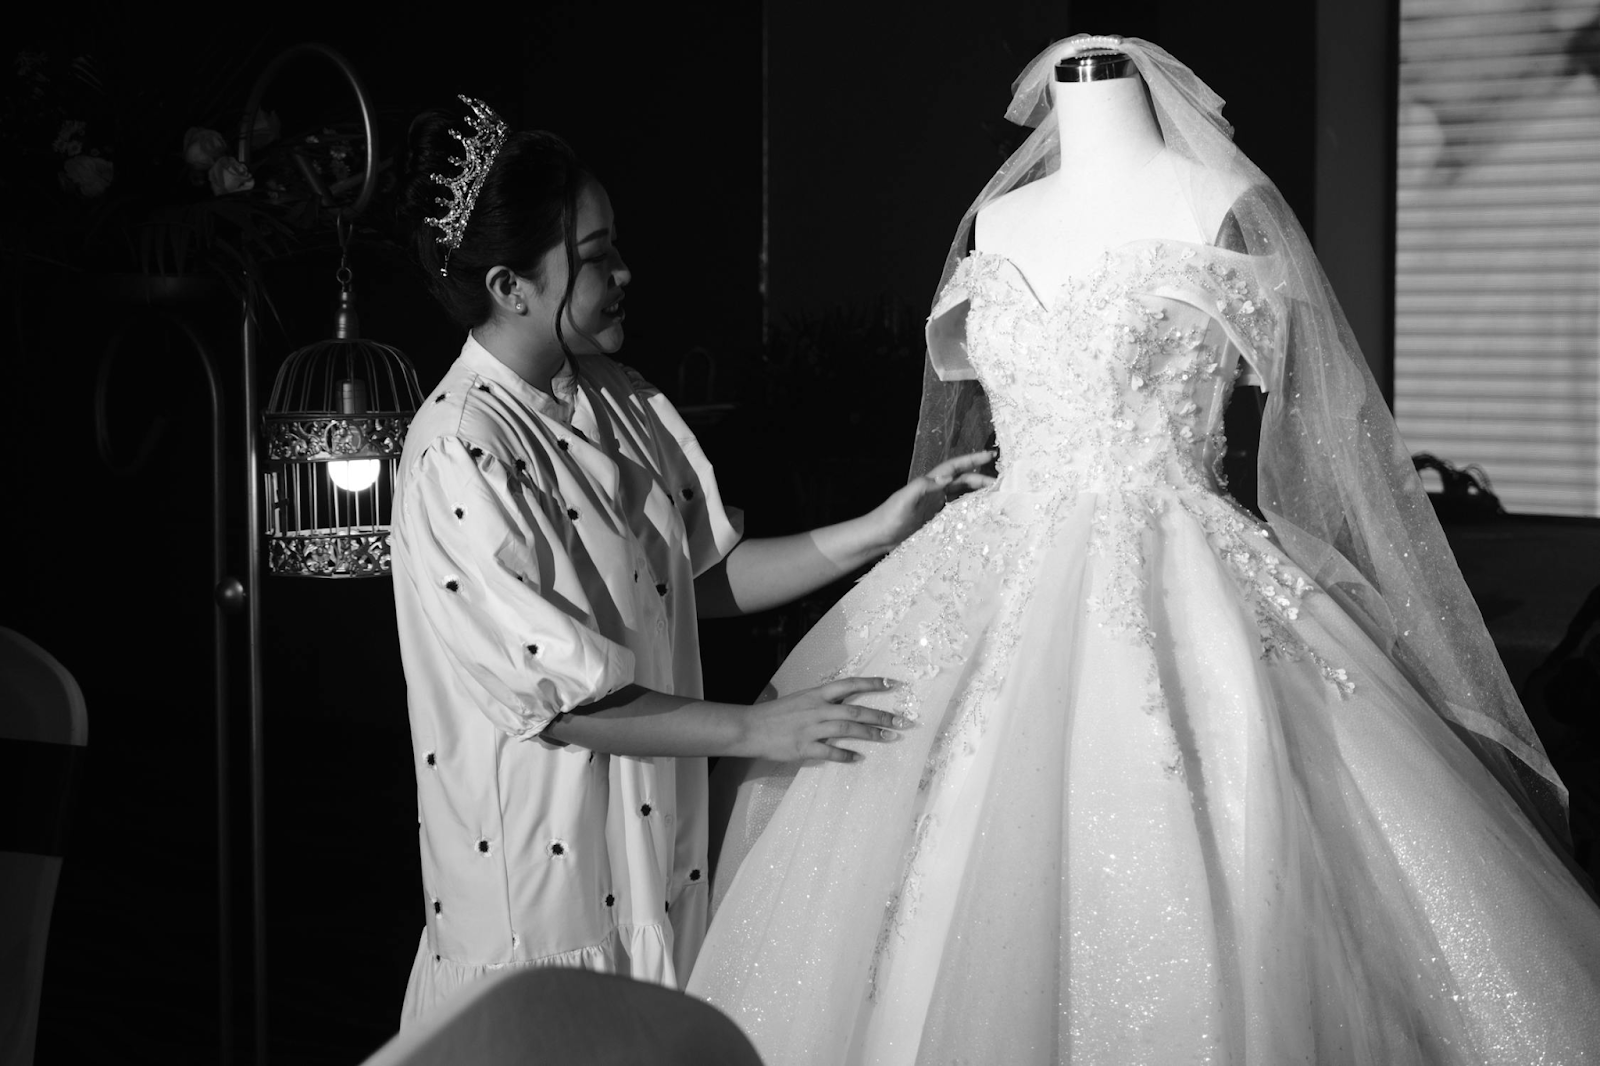 Bride in tiara adjusting elegant lace wedding dress on mannequin in black and white photography